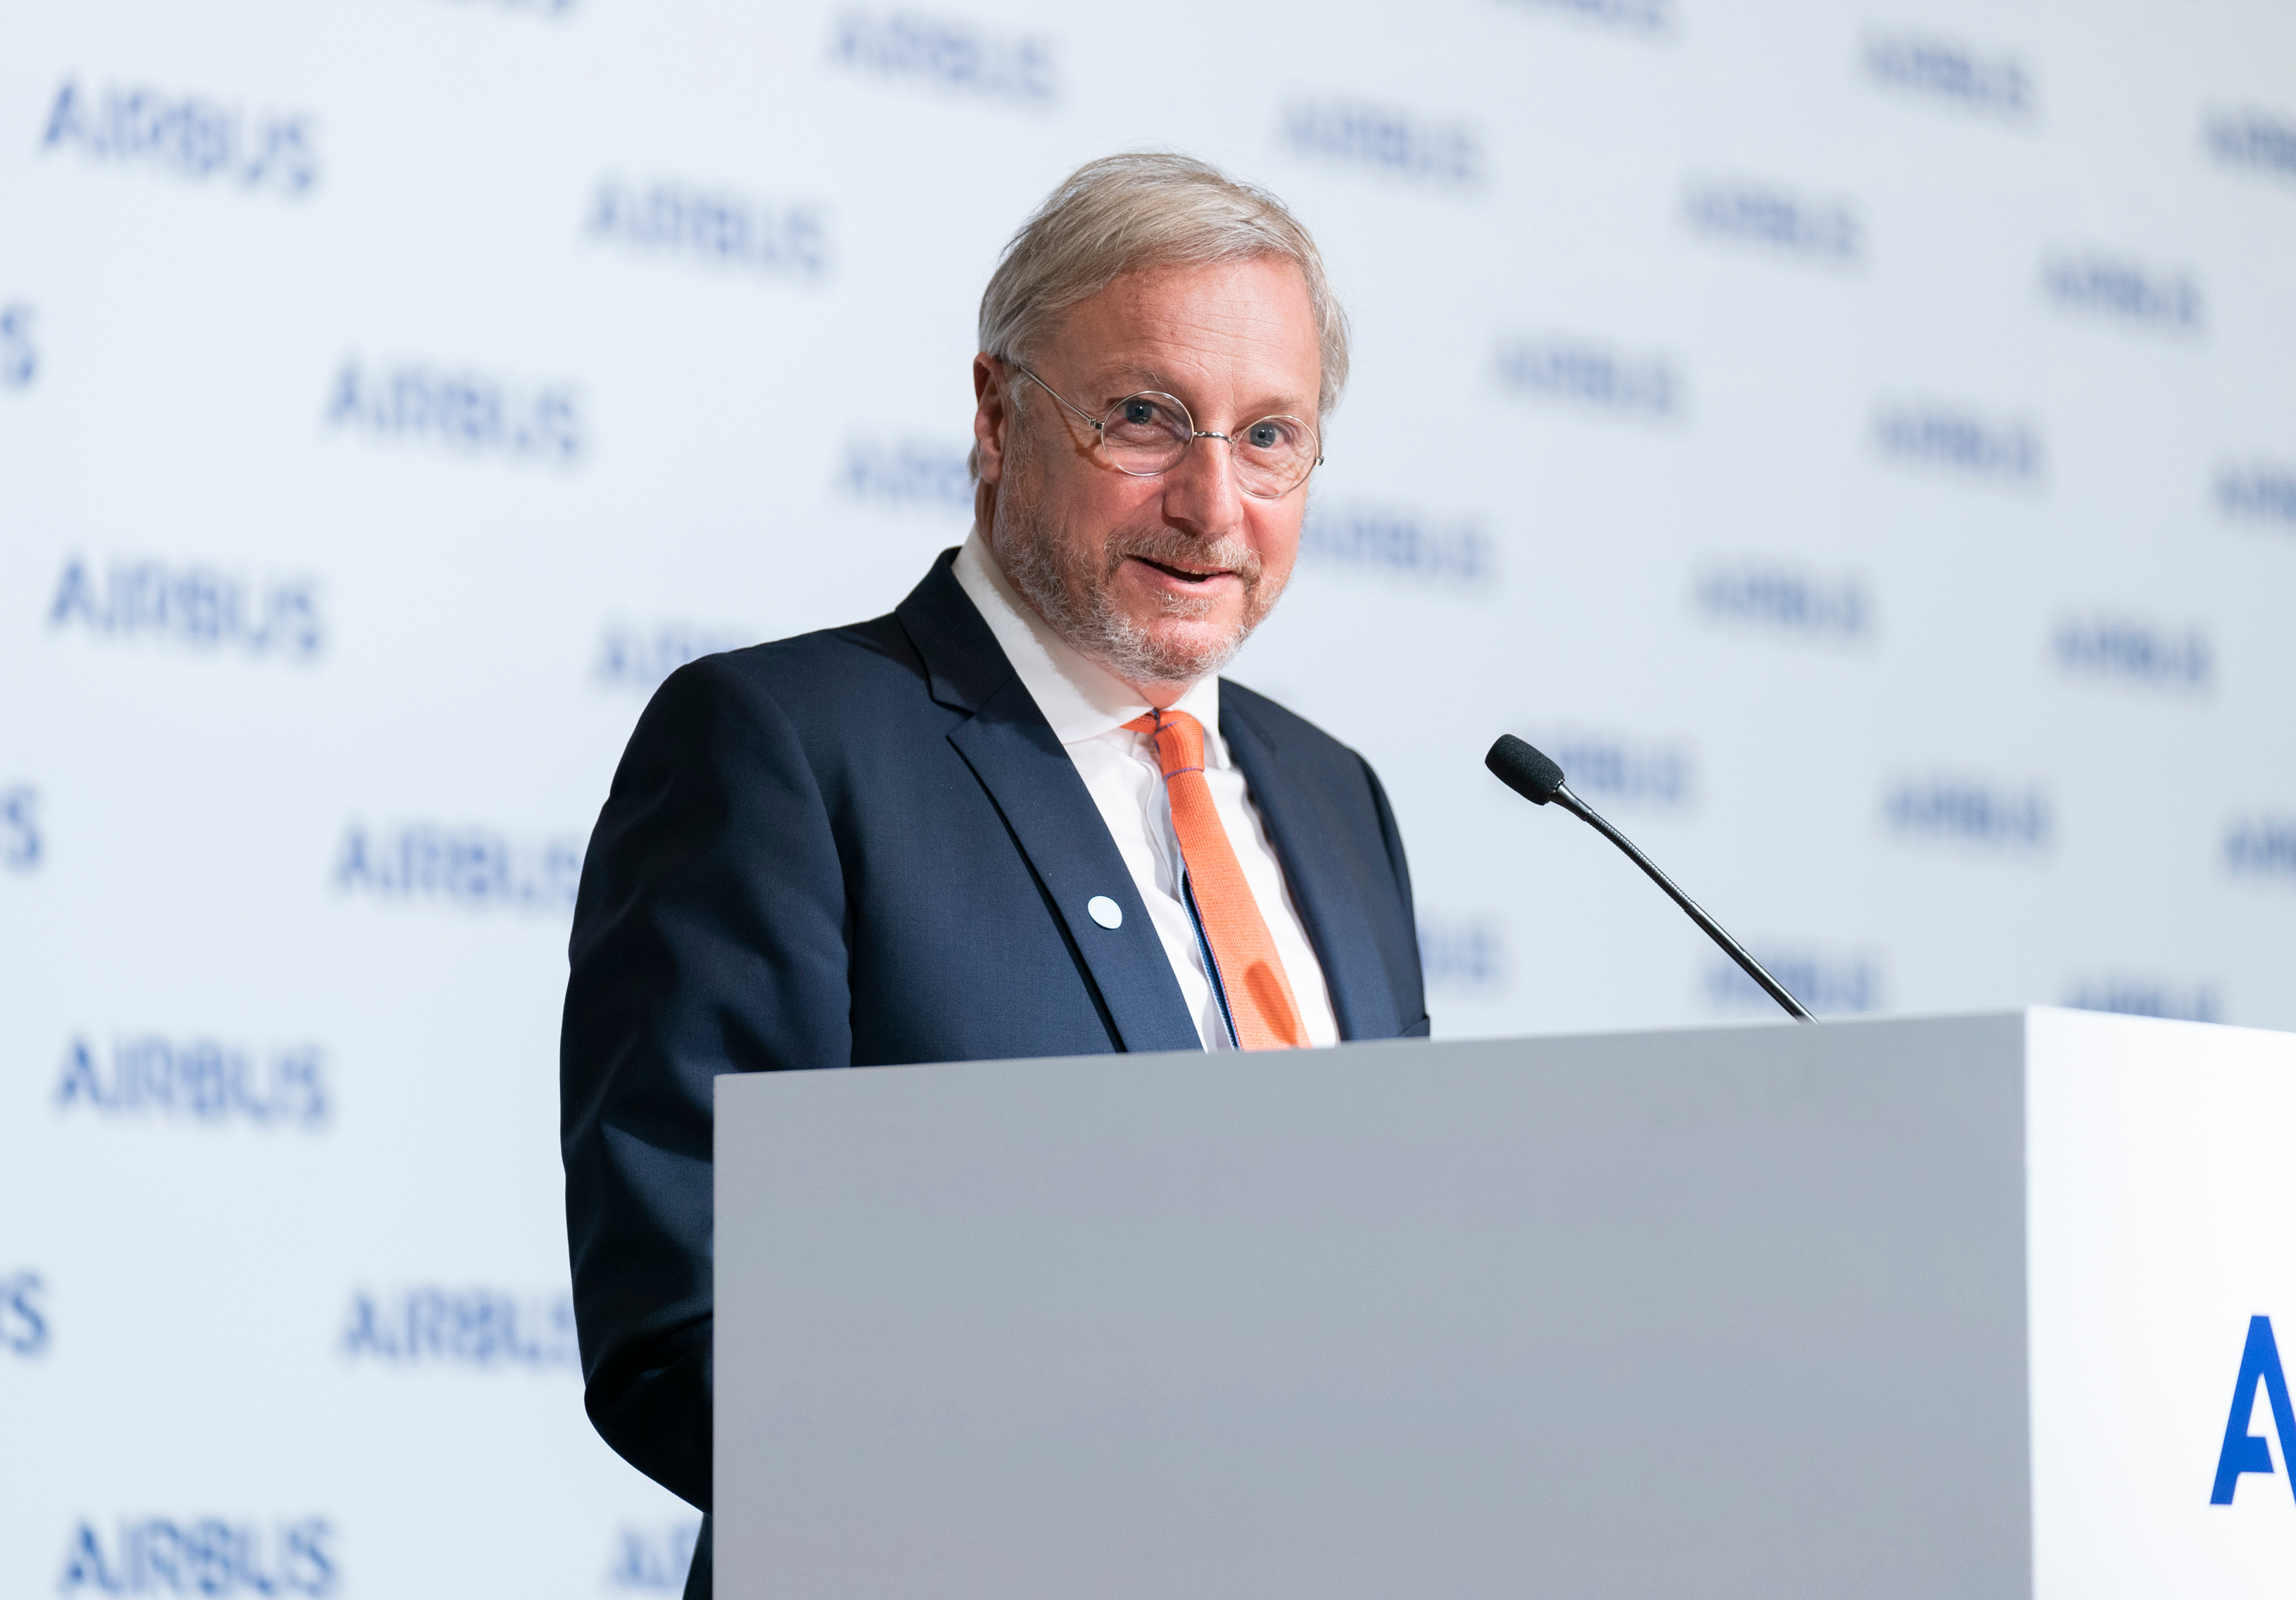 Airbus Chief Commercial Officer Christian Scherer